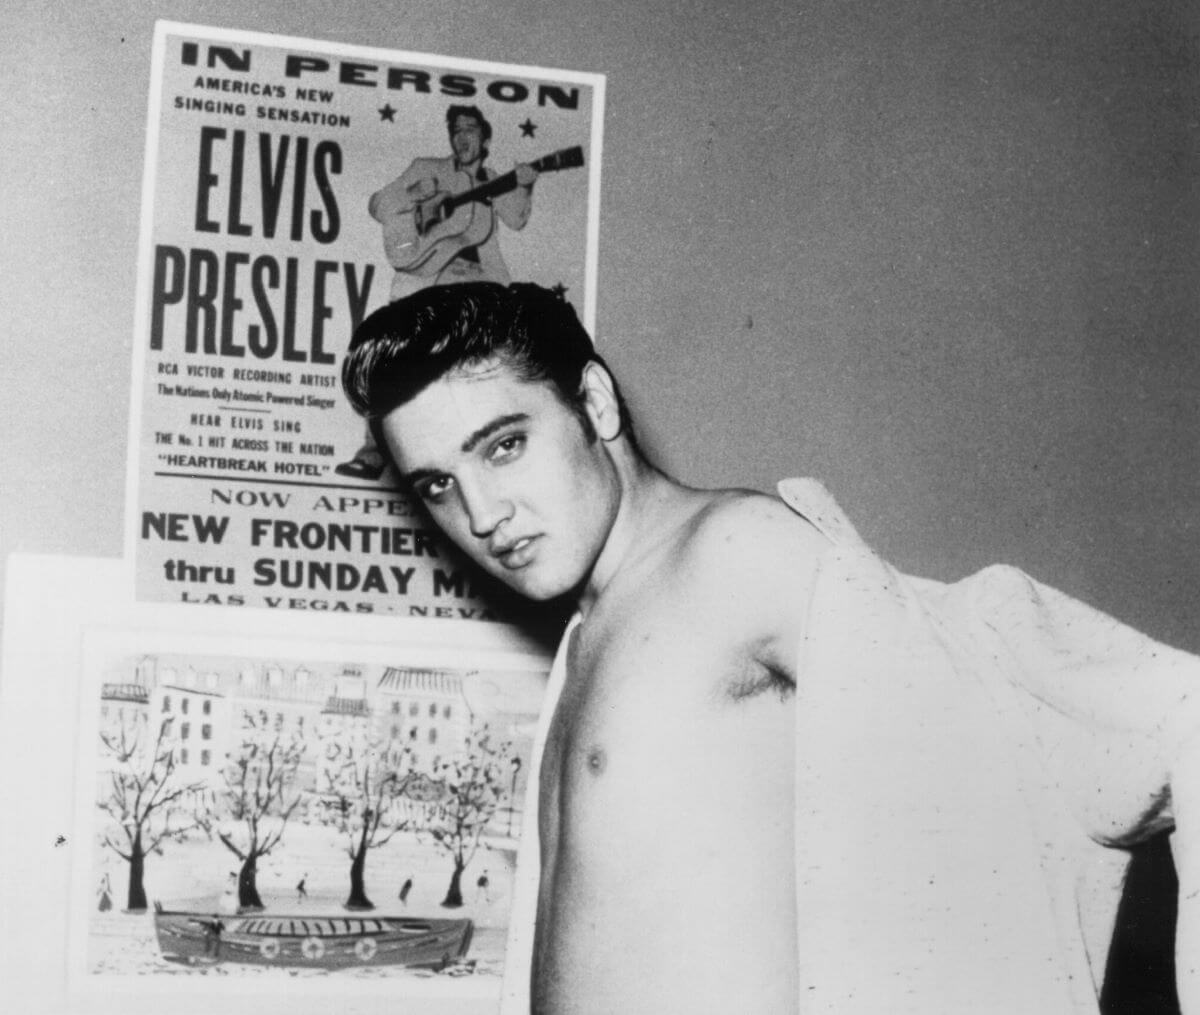 A black and white picture of Elvis putting his shirt on and standing in front of a poster for his show at the New Frontier Hotel.